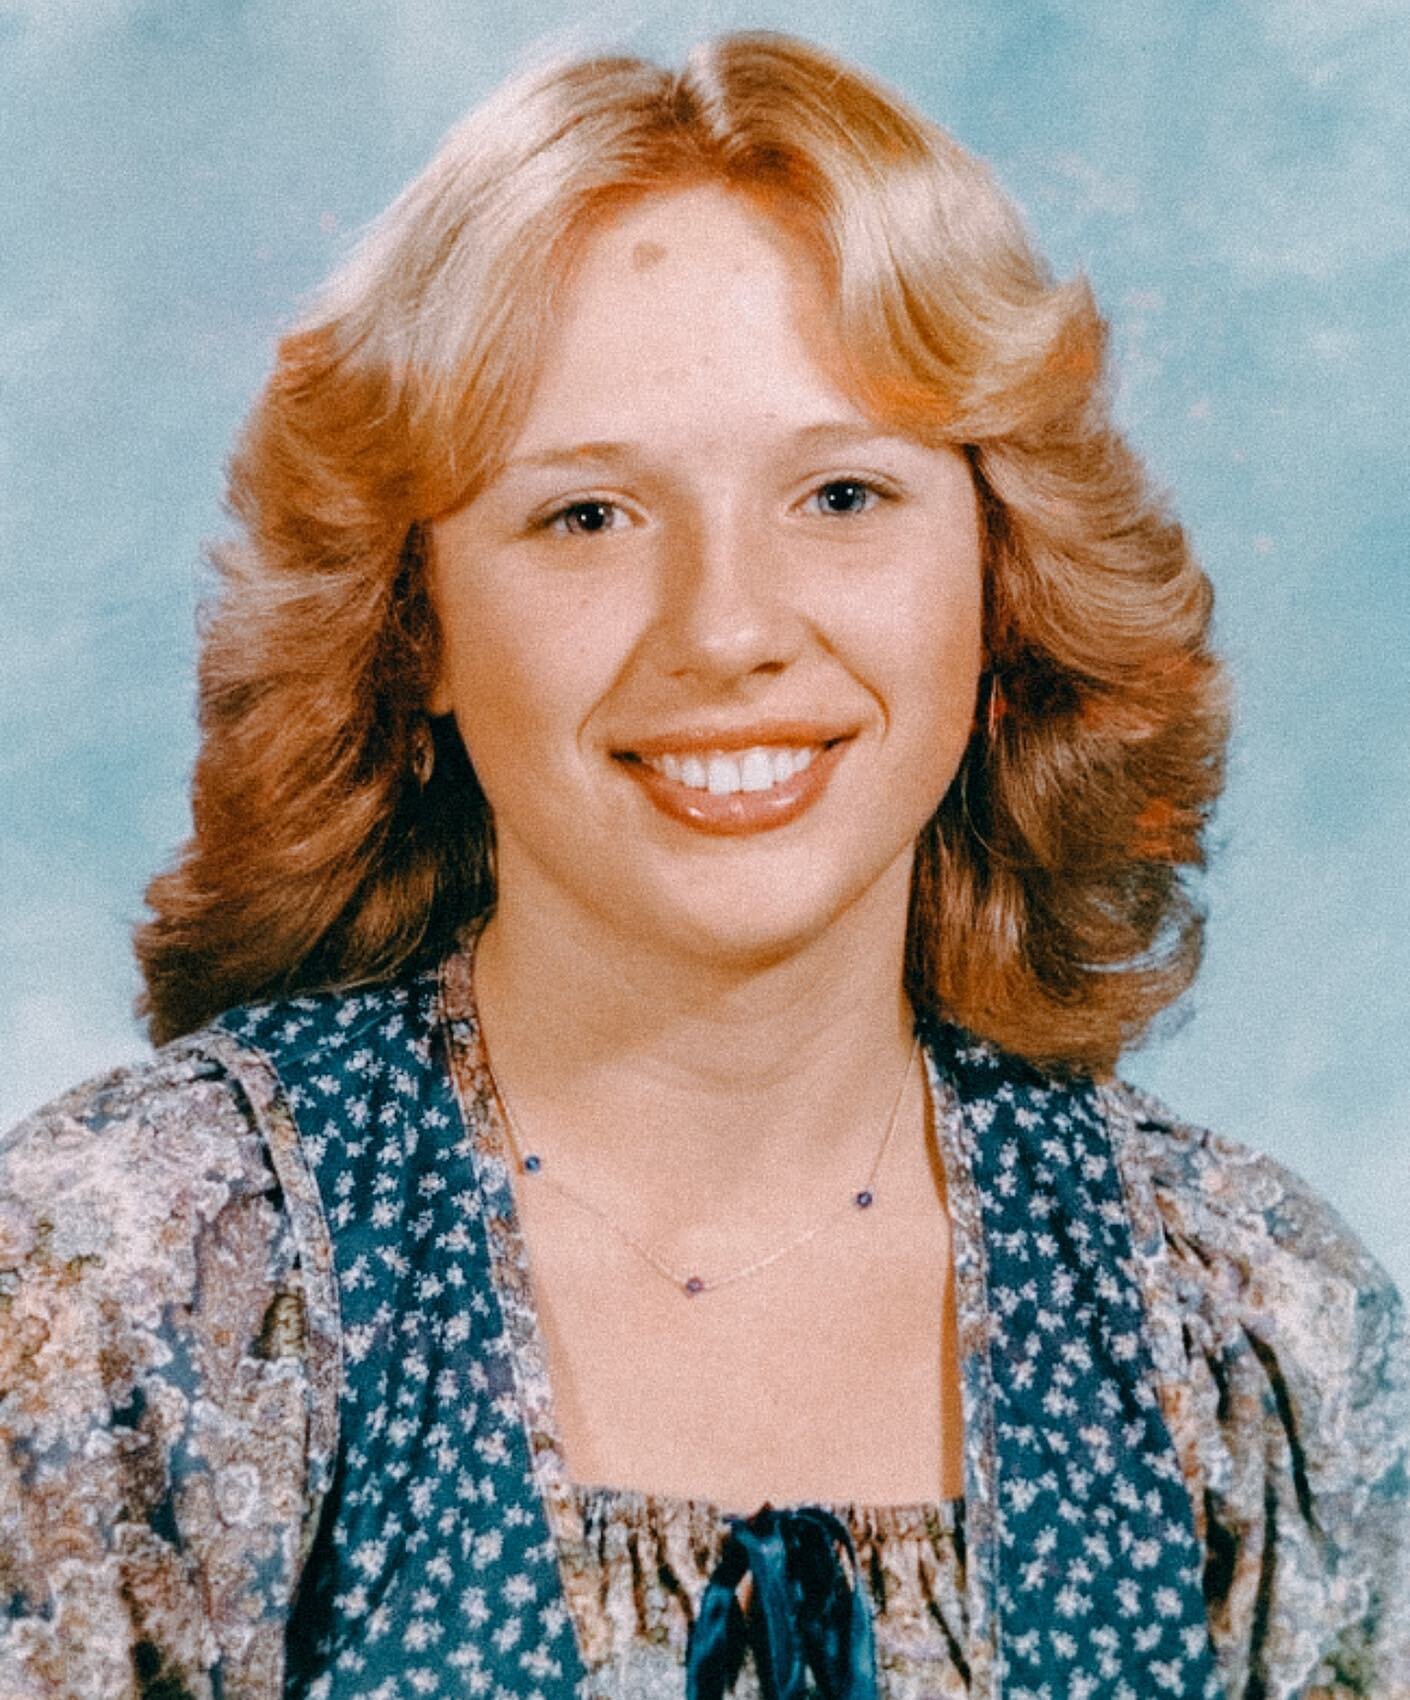 On the evening of August 8th, 1980, 16-year-old Joyce McLain went out for a jog near her home in East Millinocket and never came home. A few days later, her body was recovered near a power line clearing close to the very soccer field she was set to p